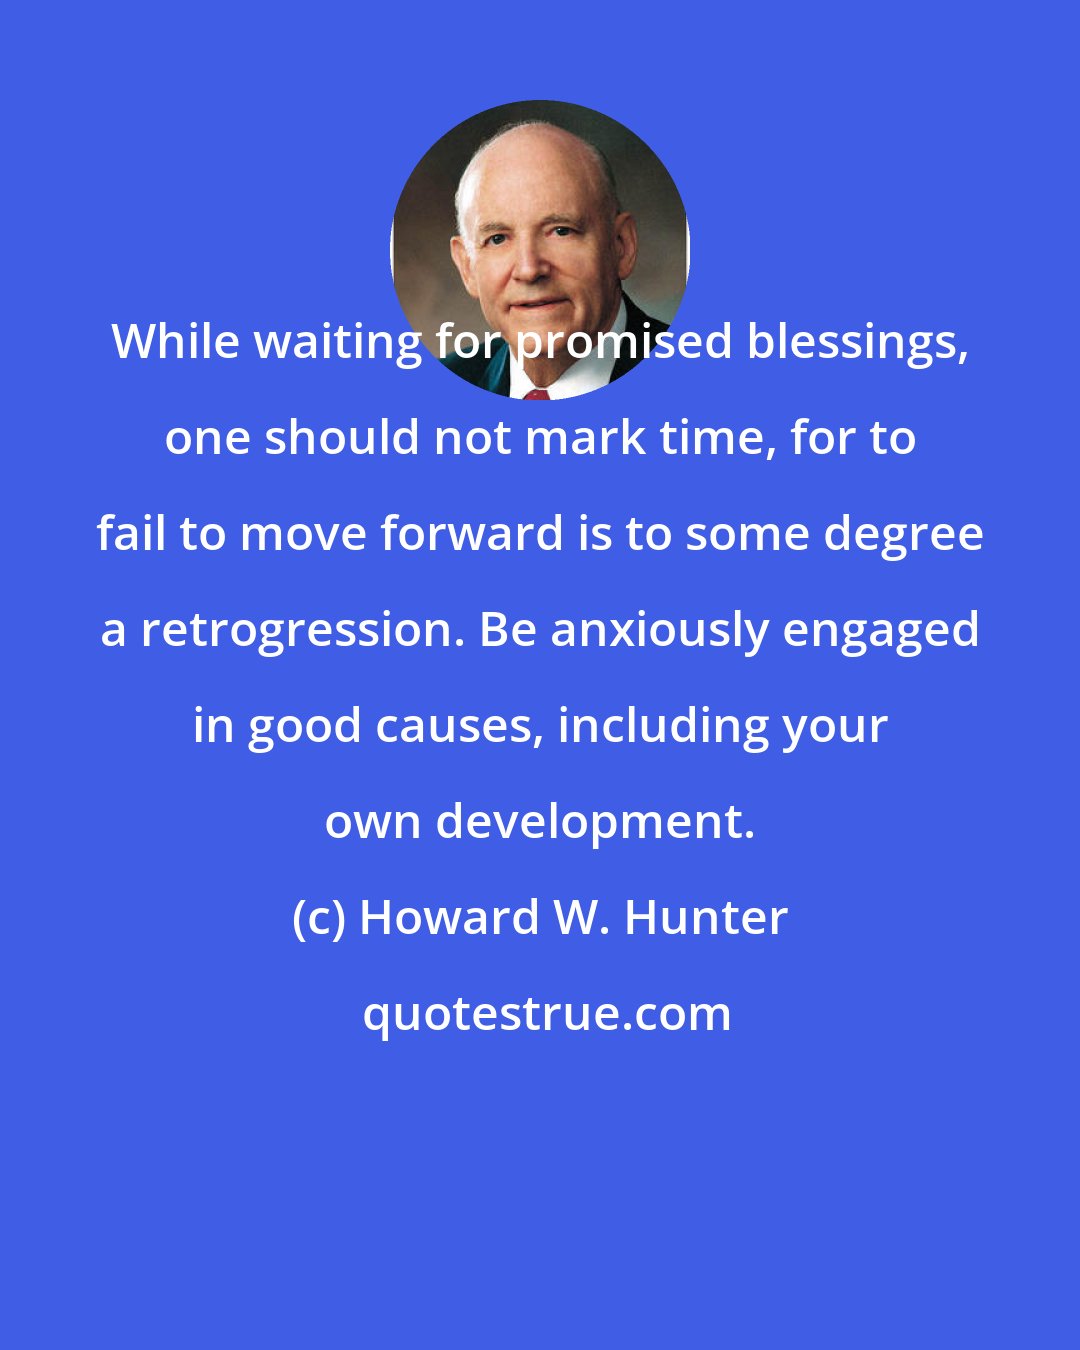 Howard W. Hunter: While waiting for promised blessings, one should not mark time, for to fail to move forward is to some degree a retrogression. Be anxiously engaged in good causes, including your own development.